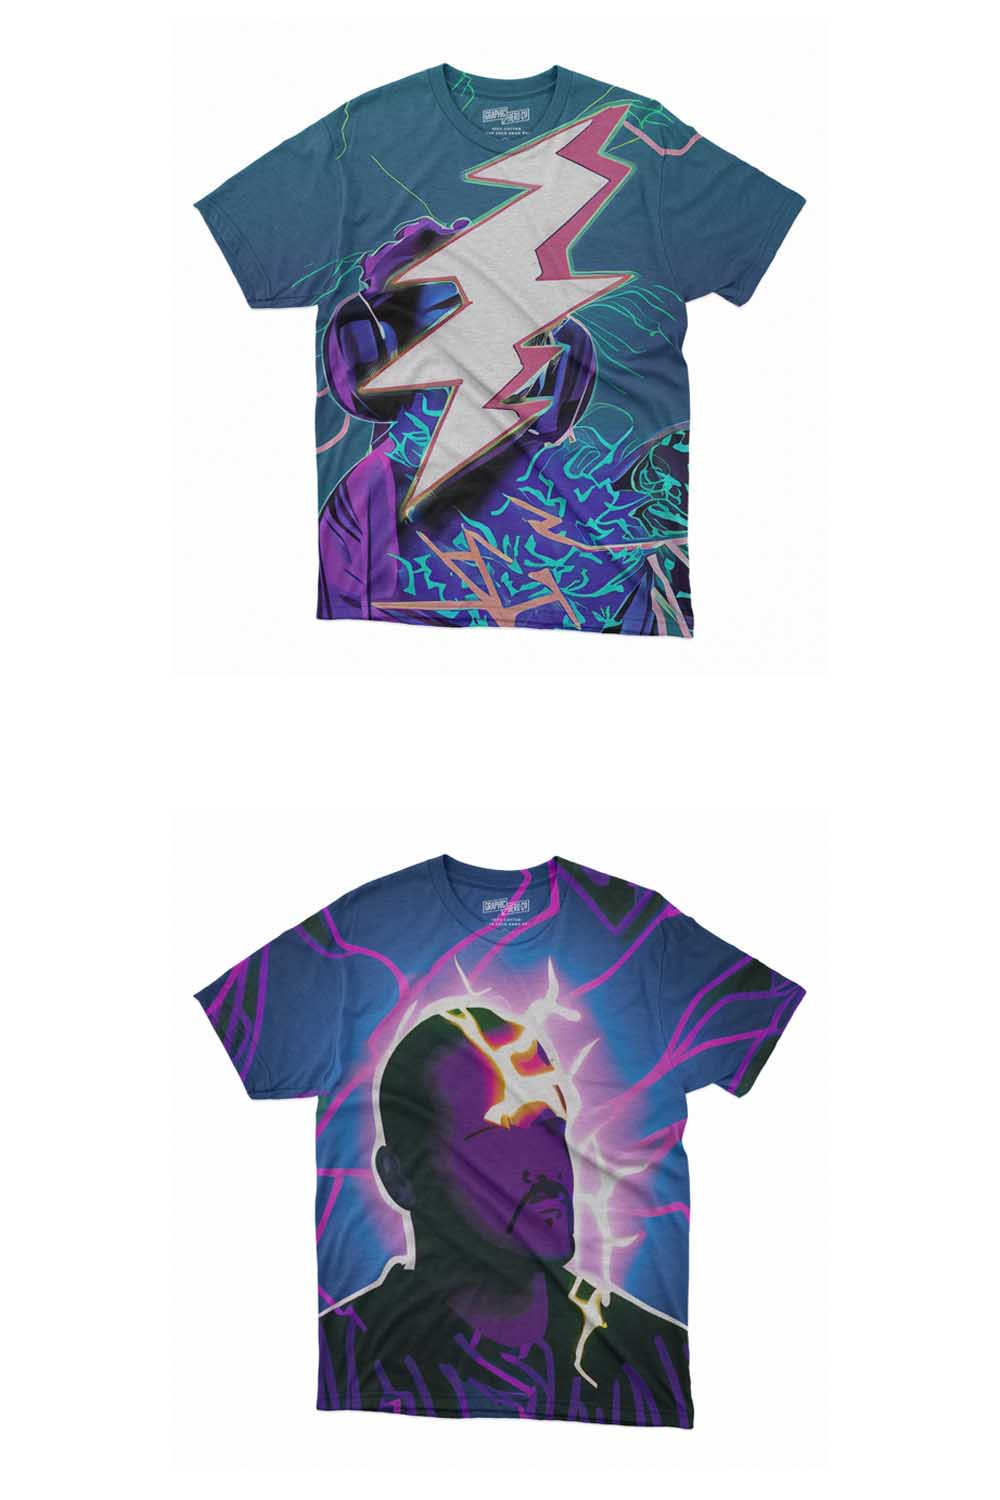 "Artistic Expressions: Unleash Your Style with Unique and Vibrant T-Shirt Designs!" pinterest preview image.